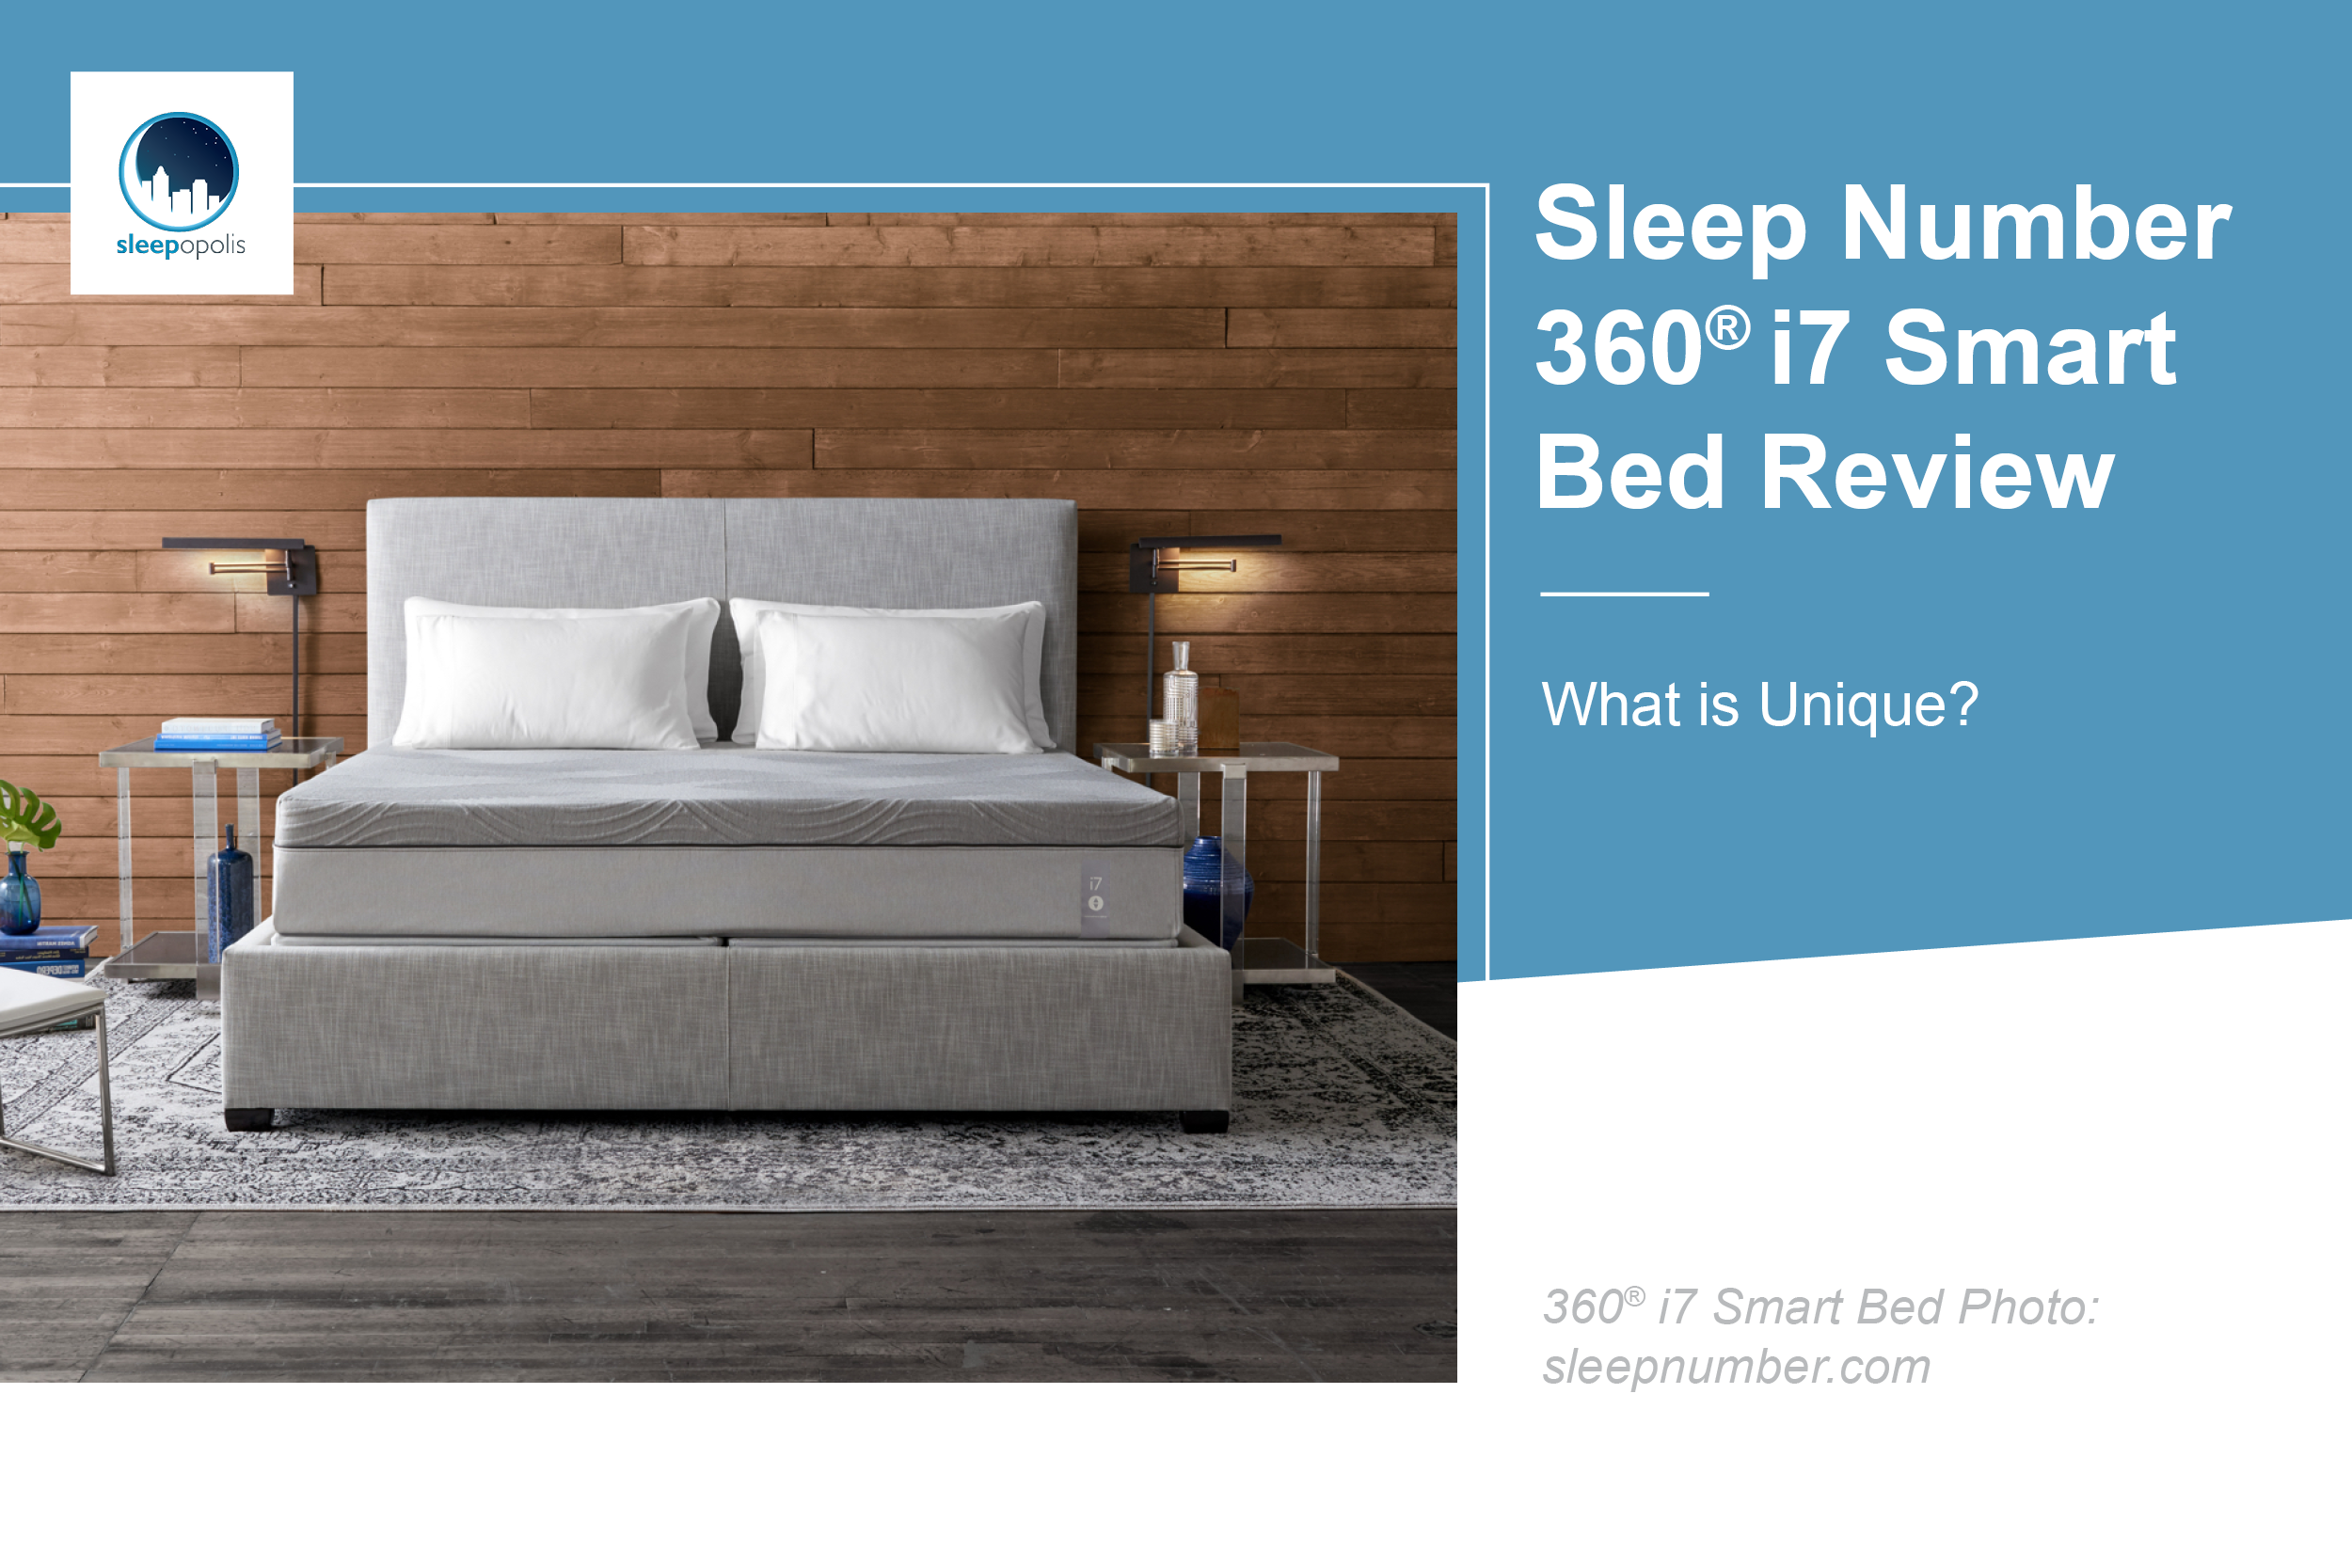 Sleep Number 360 I7 Smart Bed Review, Sleep Number 360 Smart Bed King Cost